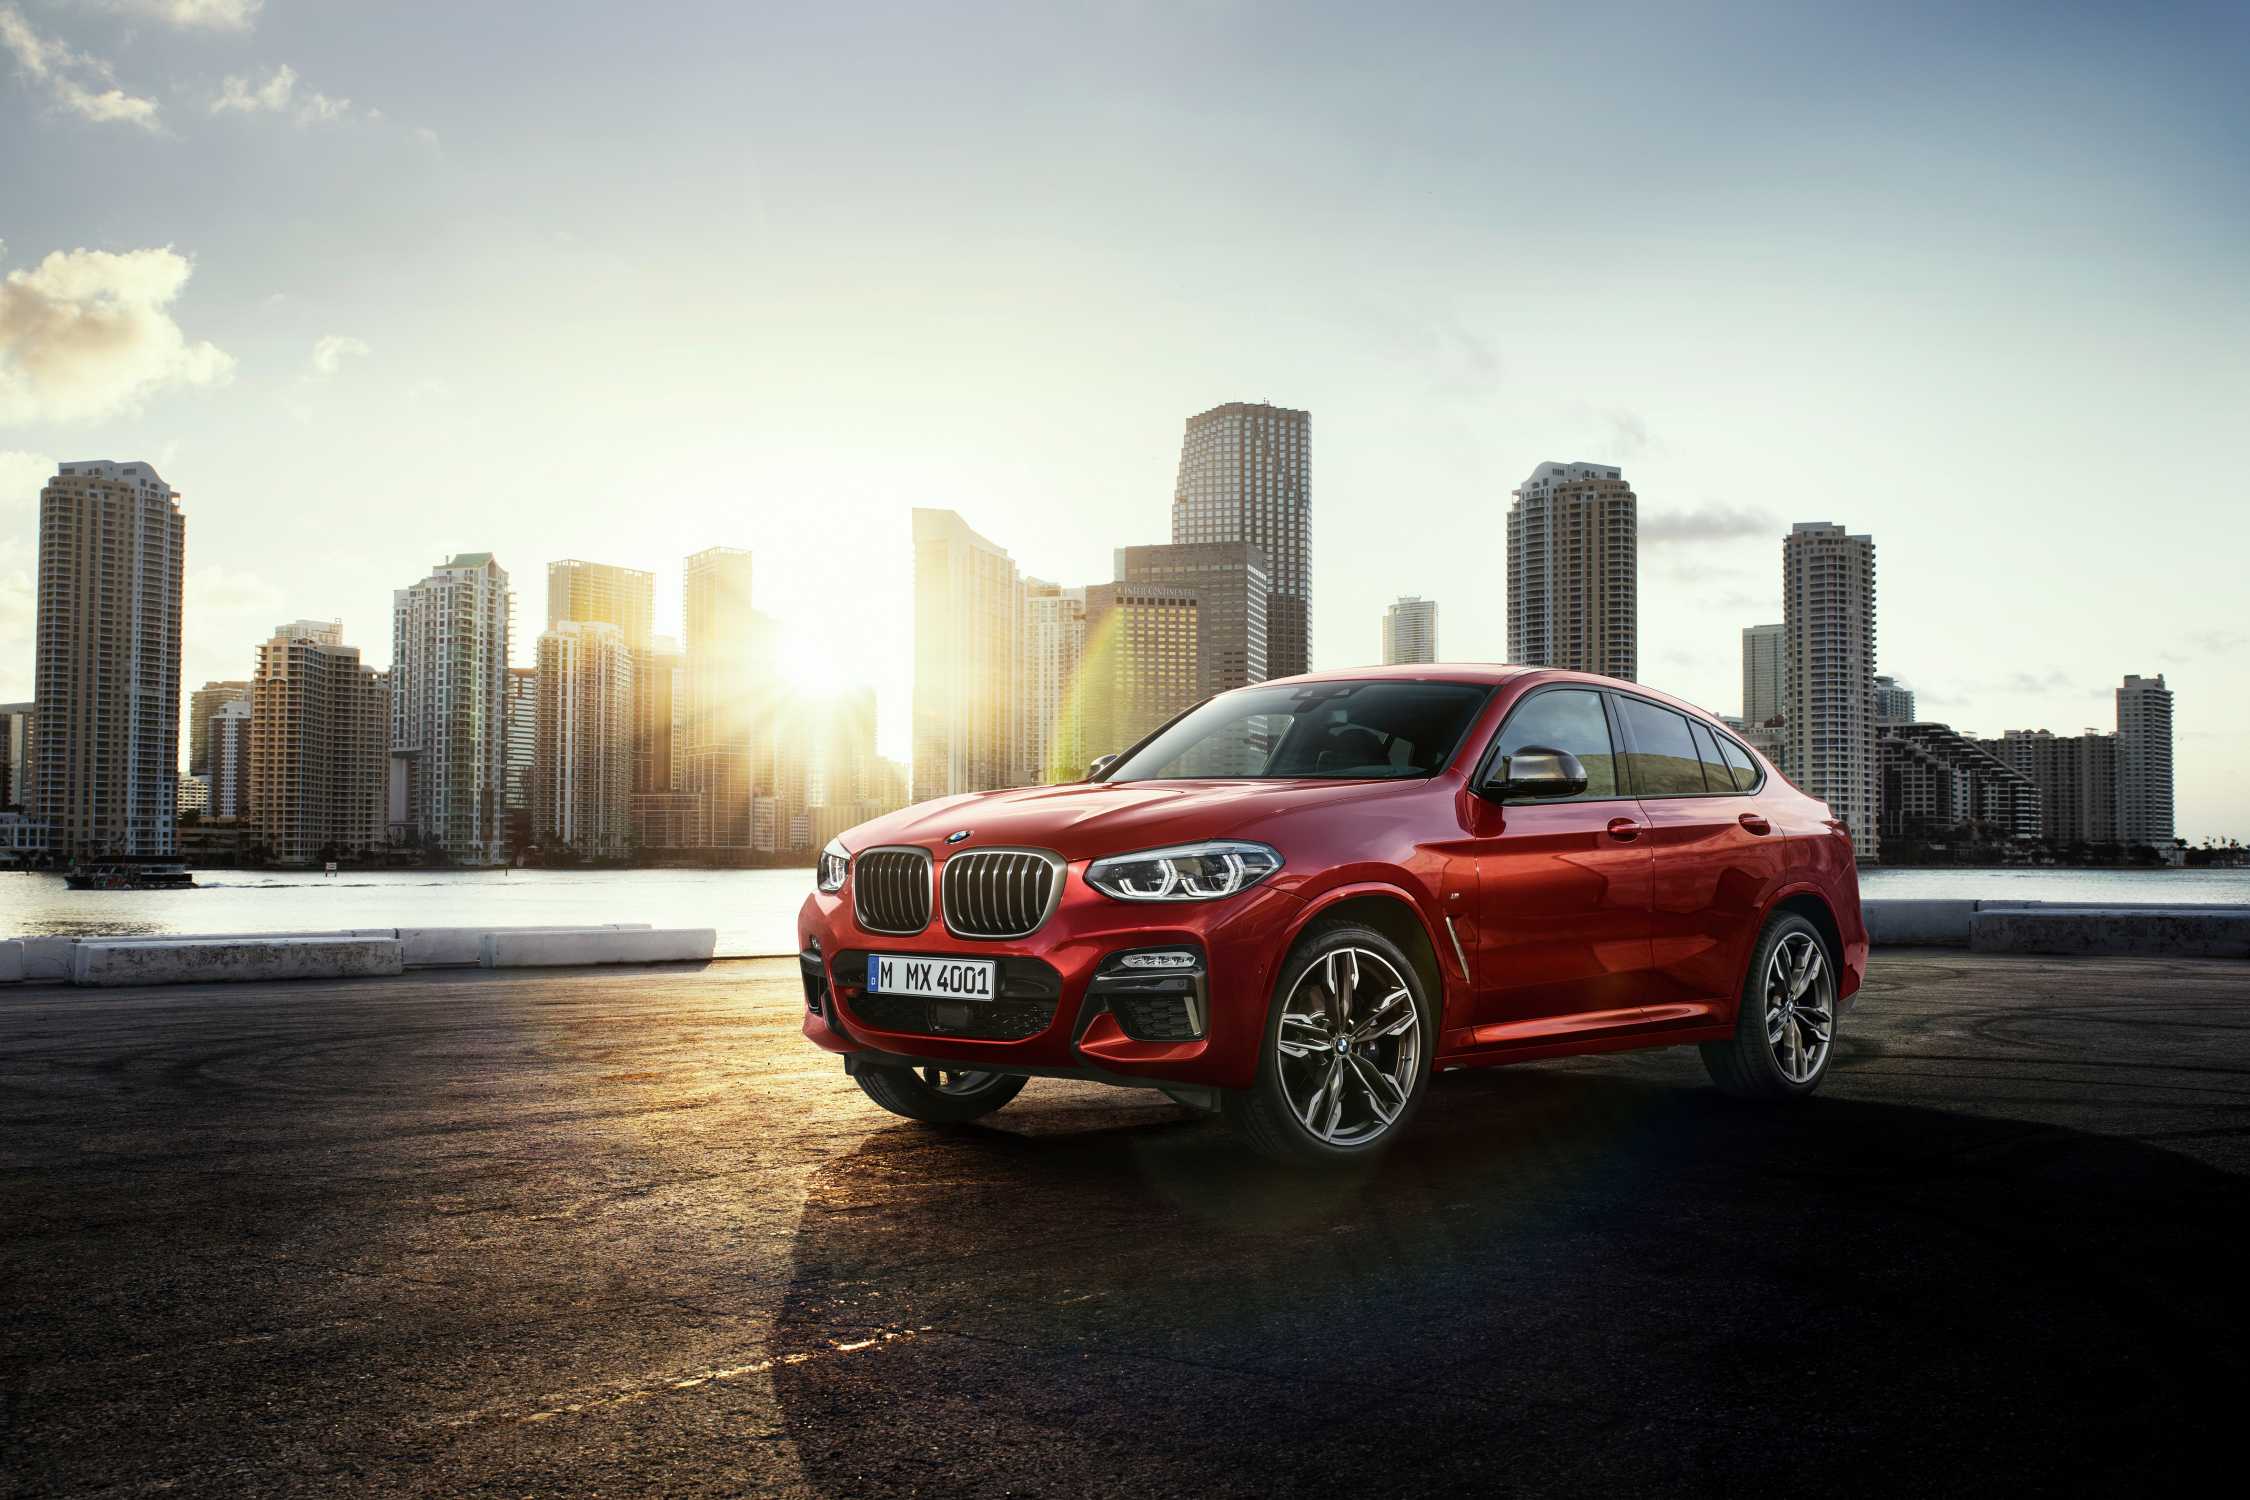 The All New Bmw X4 Is Coming